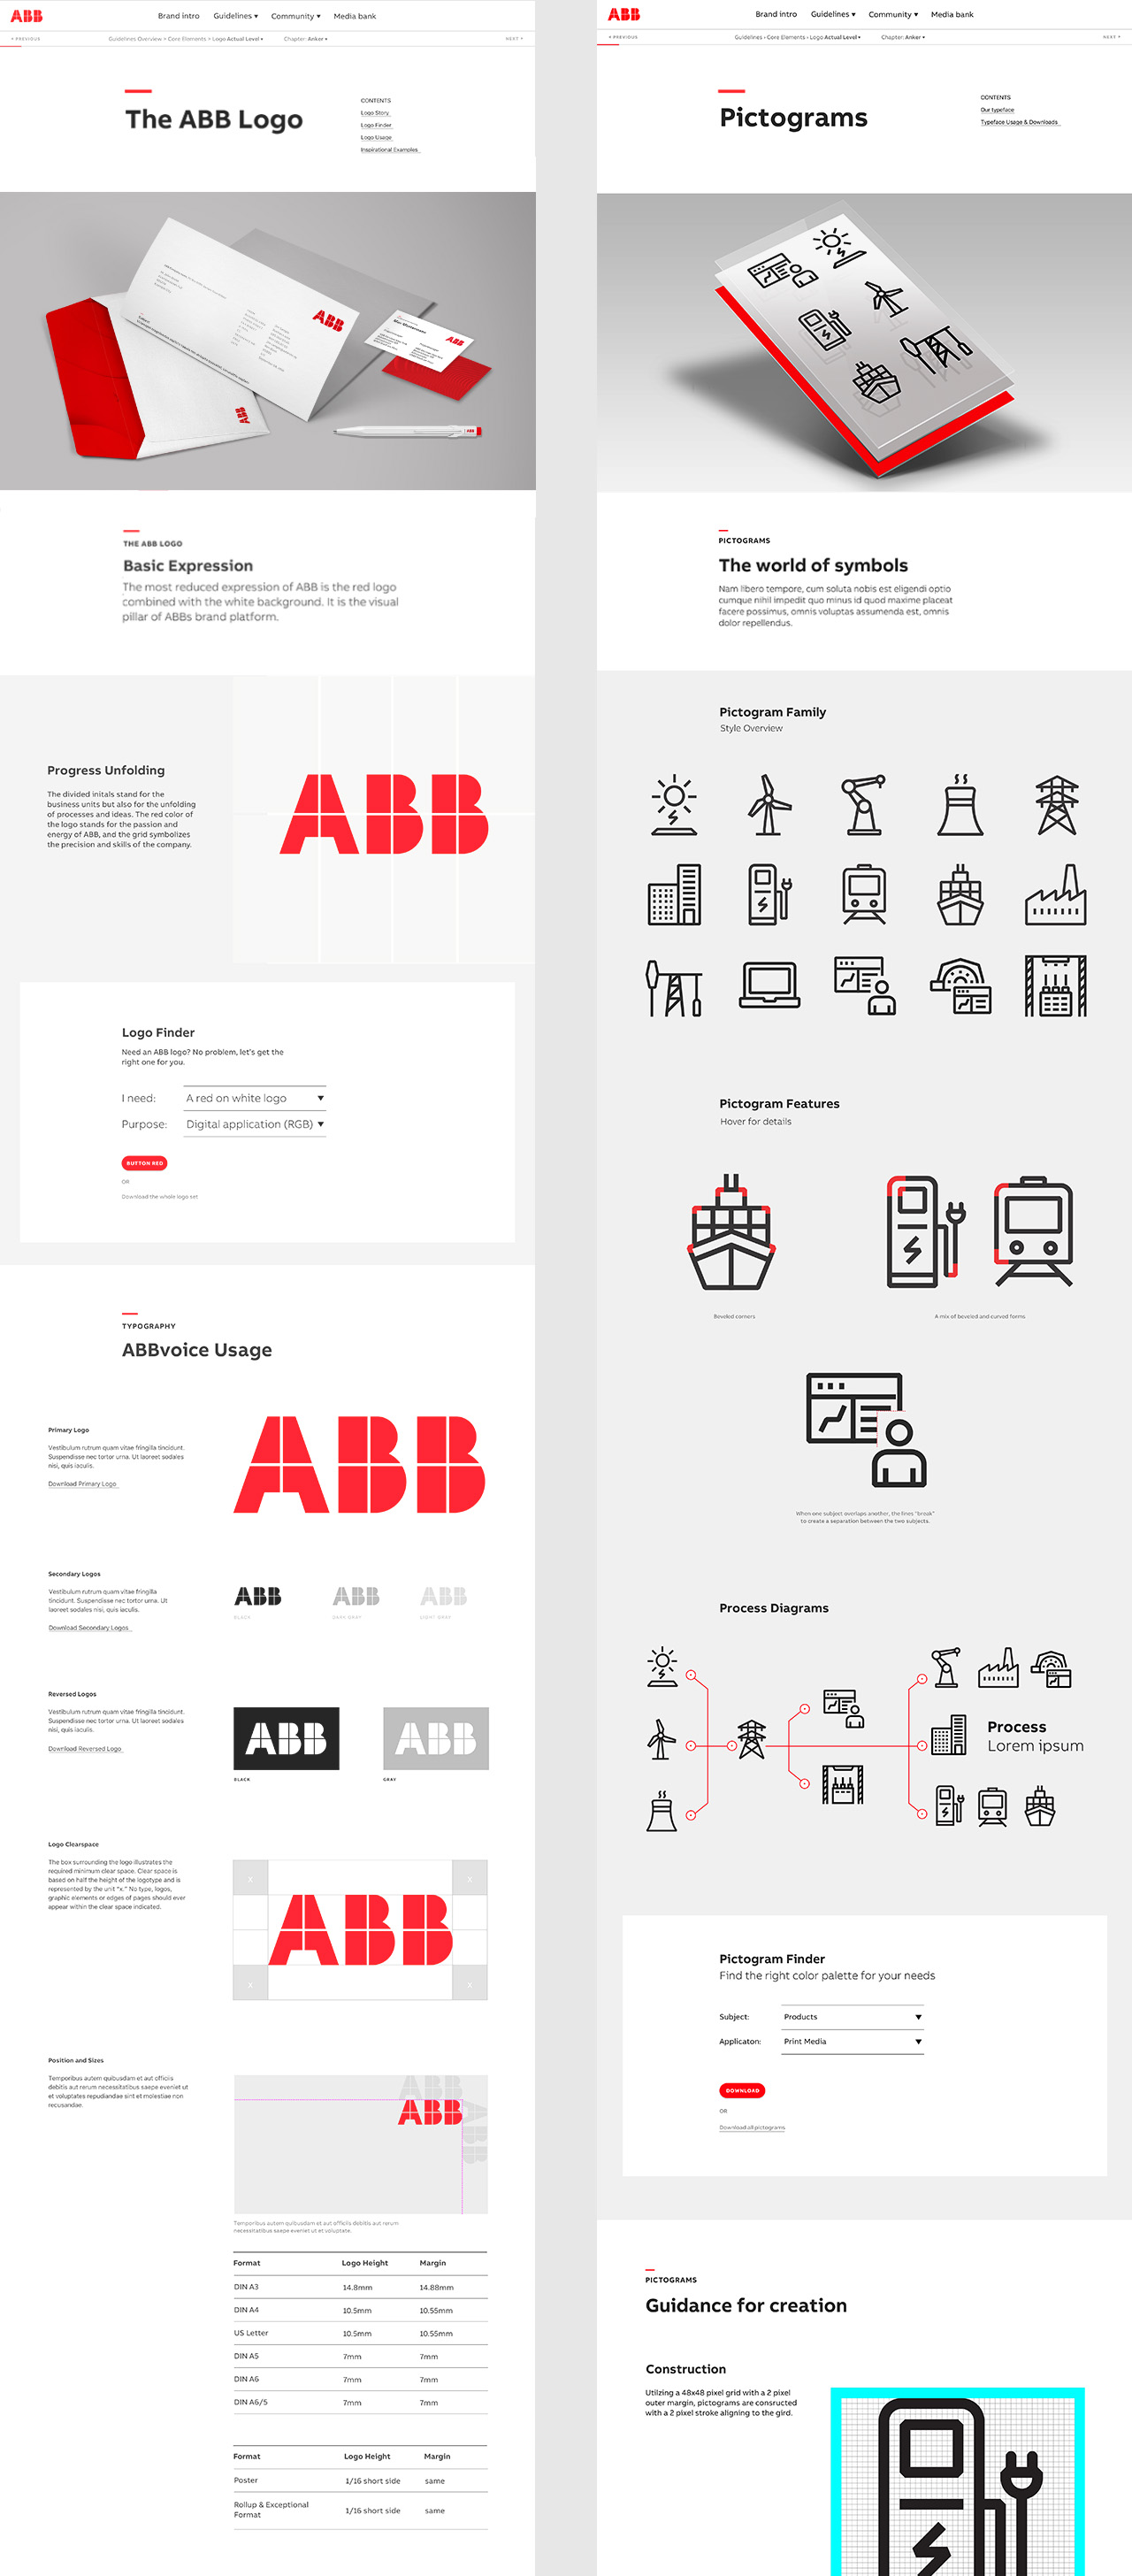 ABB_Guidelines1